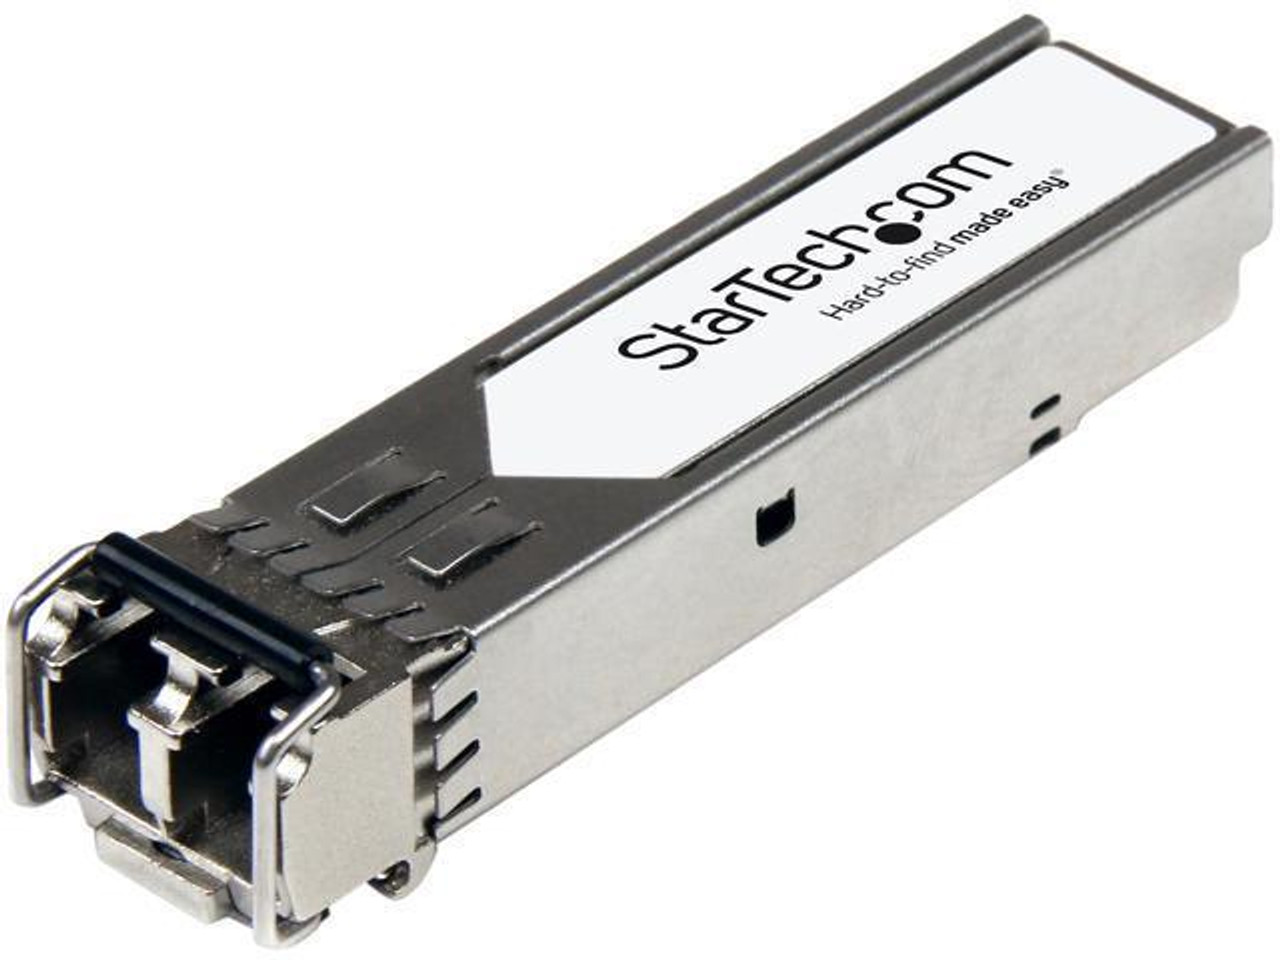 10302-ST StarTech 10Gbps 10GBase-LR Single-mode Fiber 10km 1310nm LC Connector SFP+ Transceiver Module for Extreme Networks Compatible